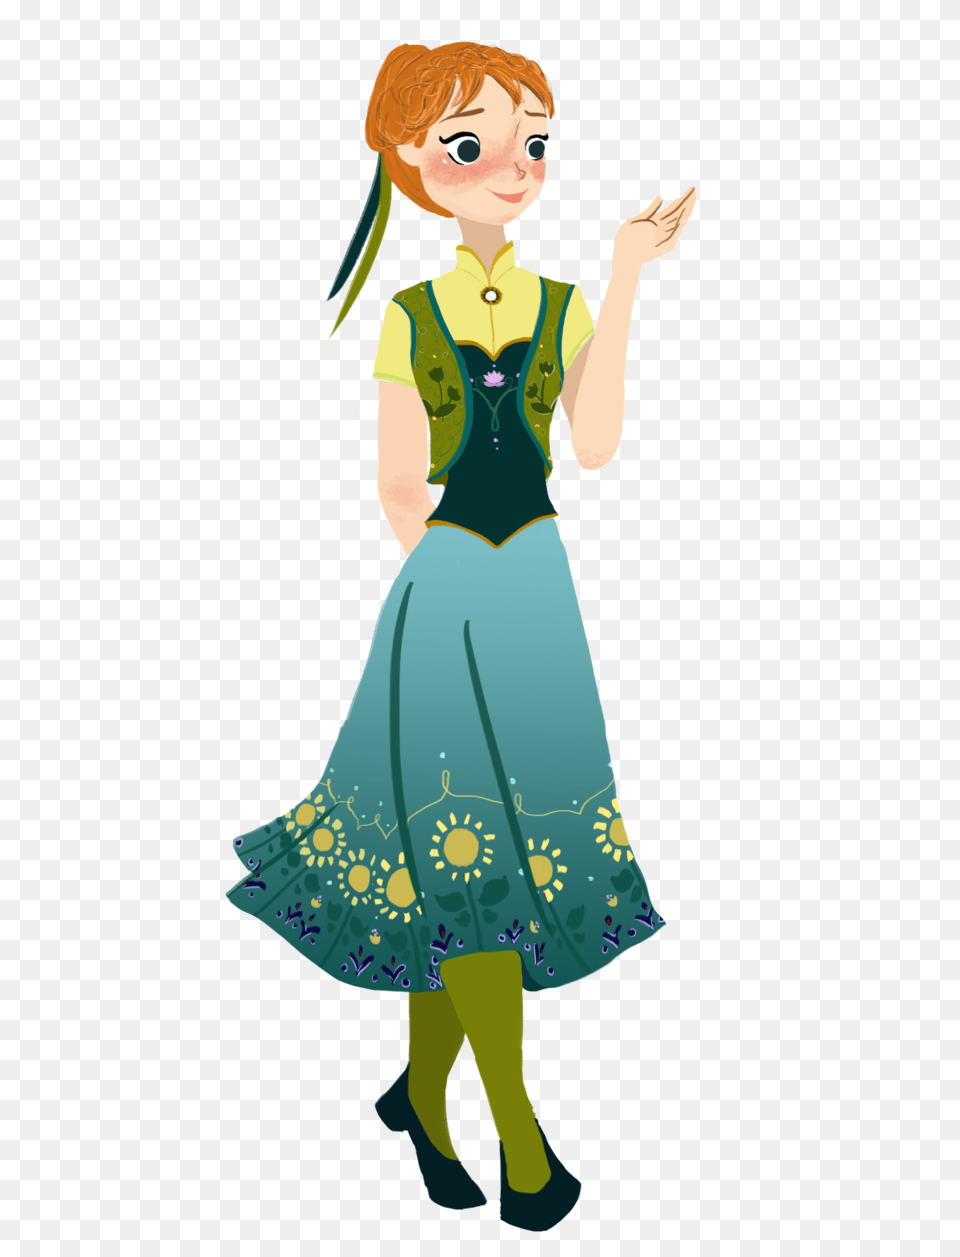 Anna Frozen Fever, Clothing, Dress, Costume, Person Png Image